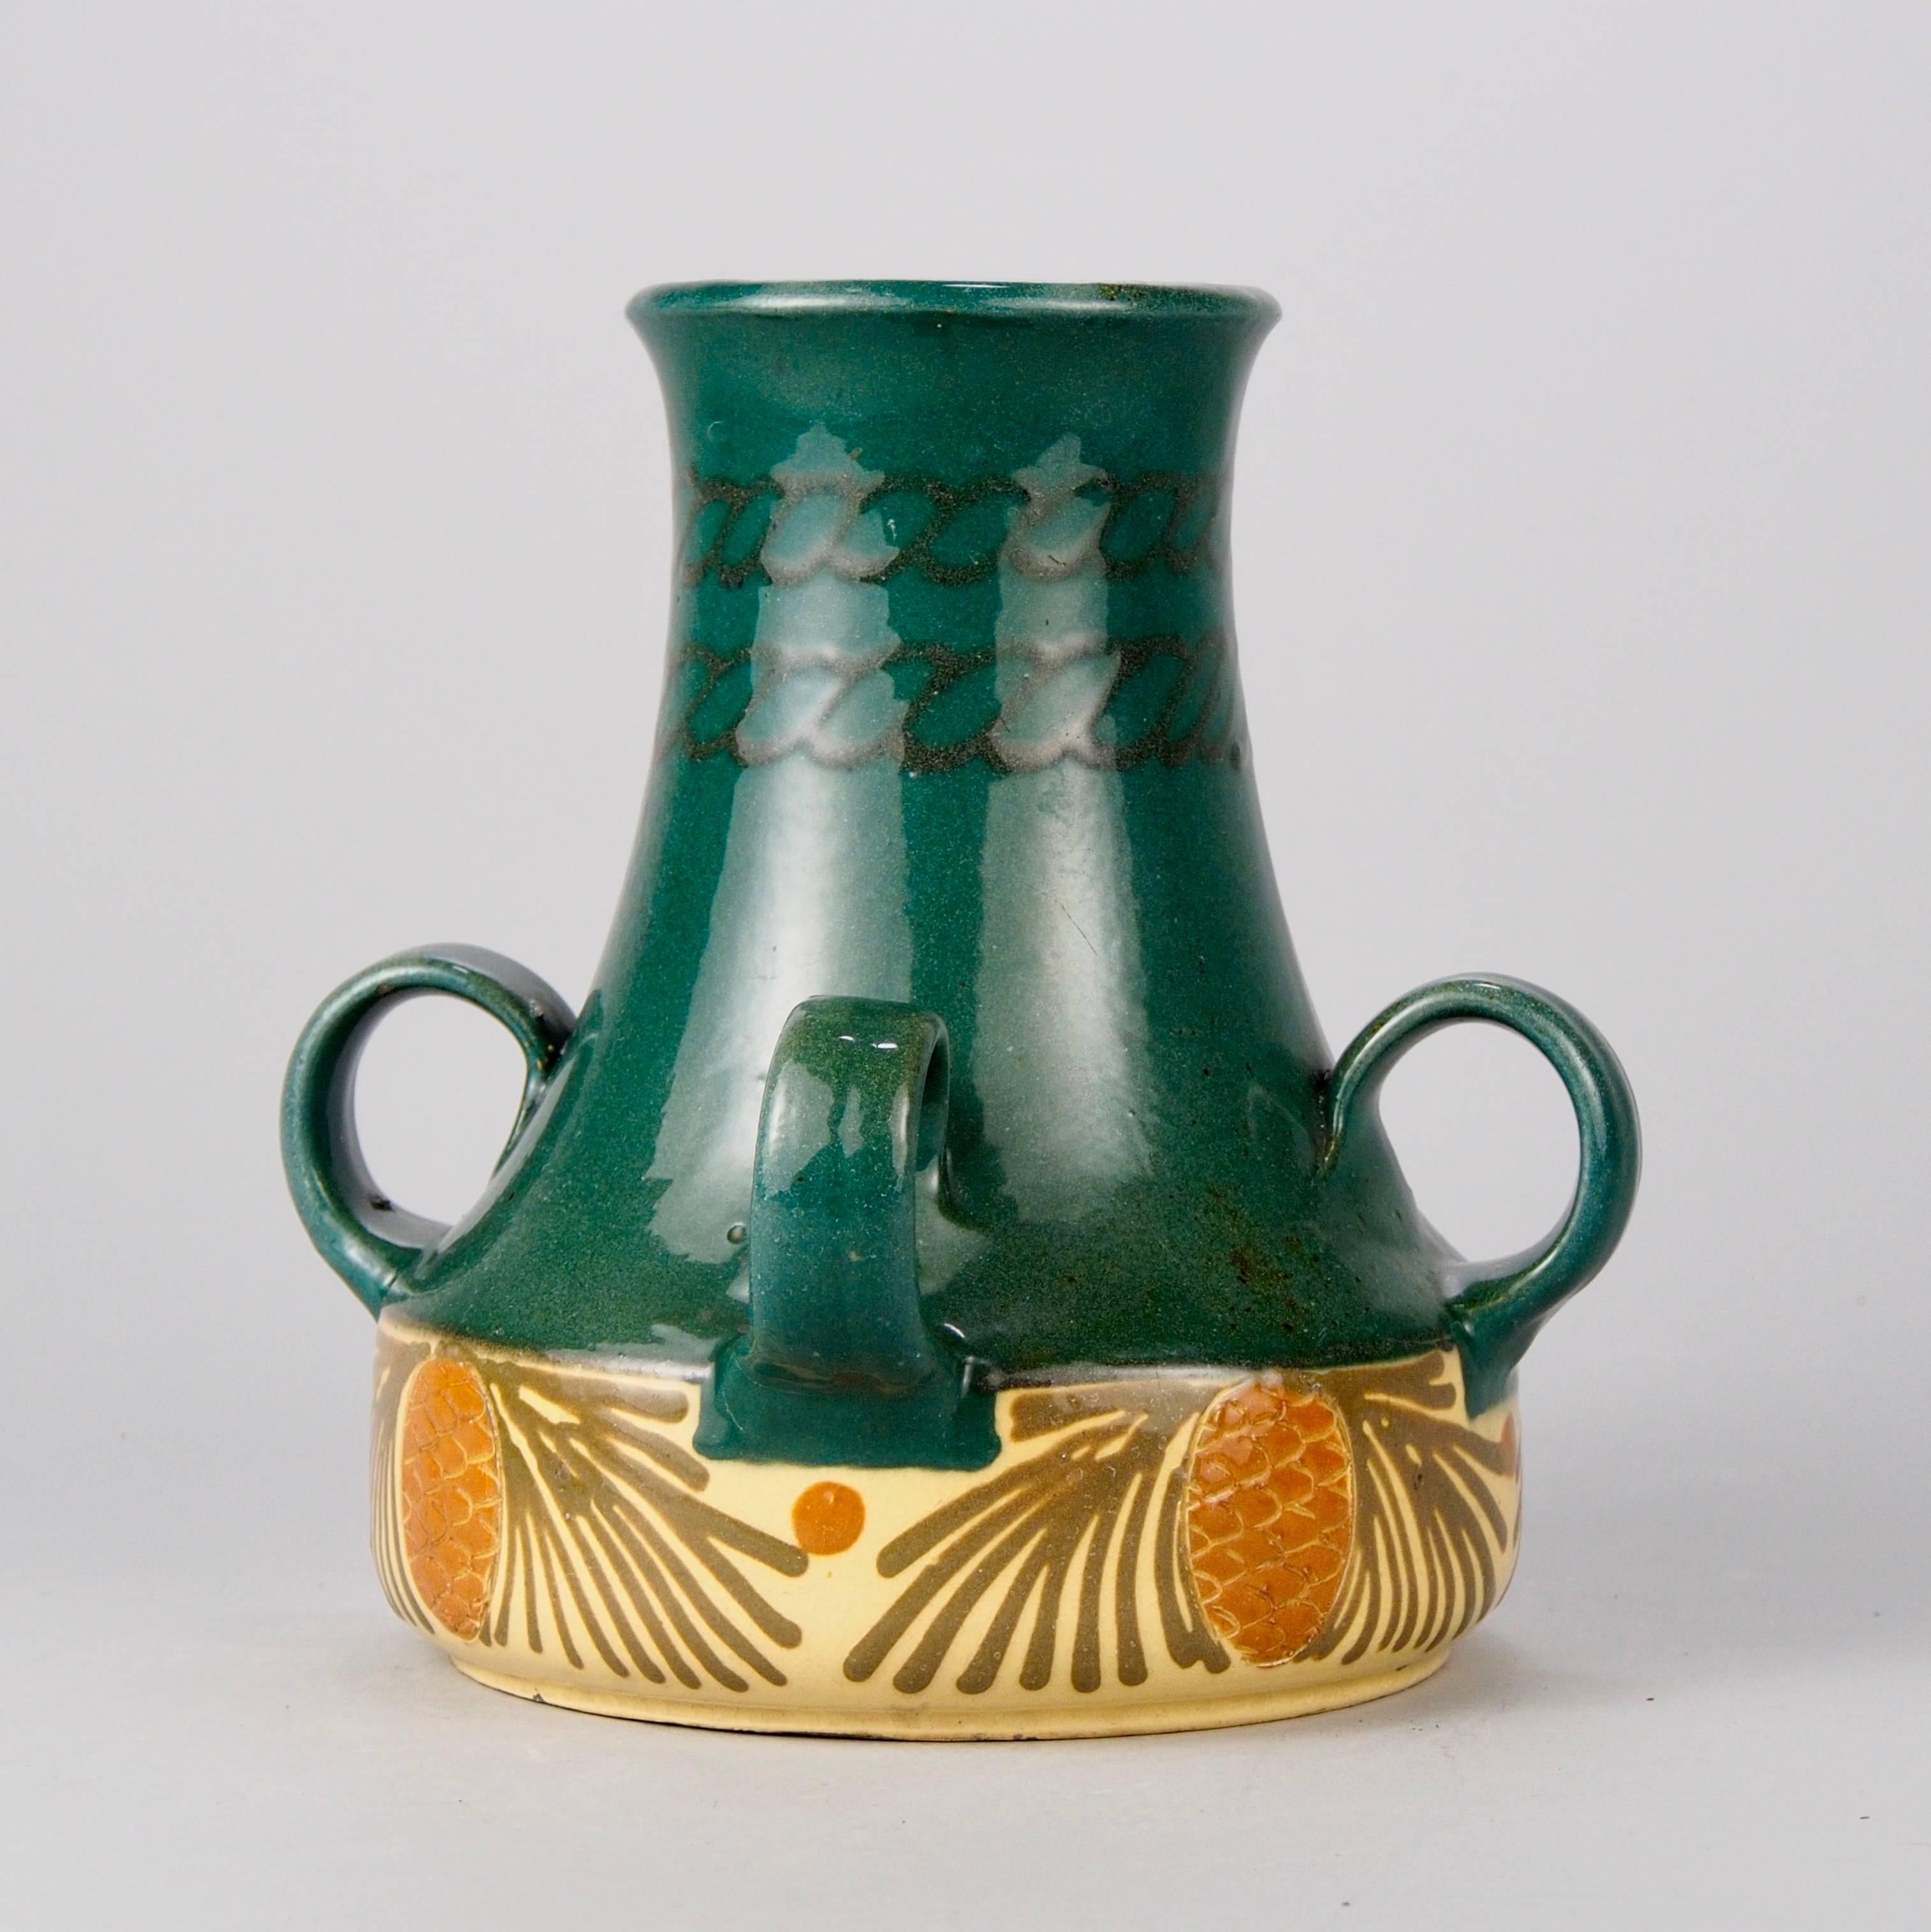 Dating from approximately 1925, this superb Art Nouveau / Jugendstil art pottery vase is signed and made by famed Elchinger et Fils, a family owned Alsatian ceramic studio founded in 1834. This piece is hand made with four handles, a deep green